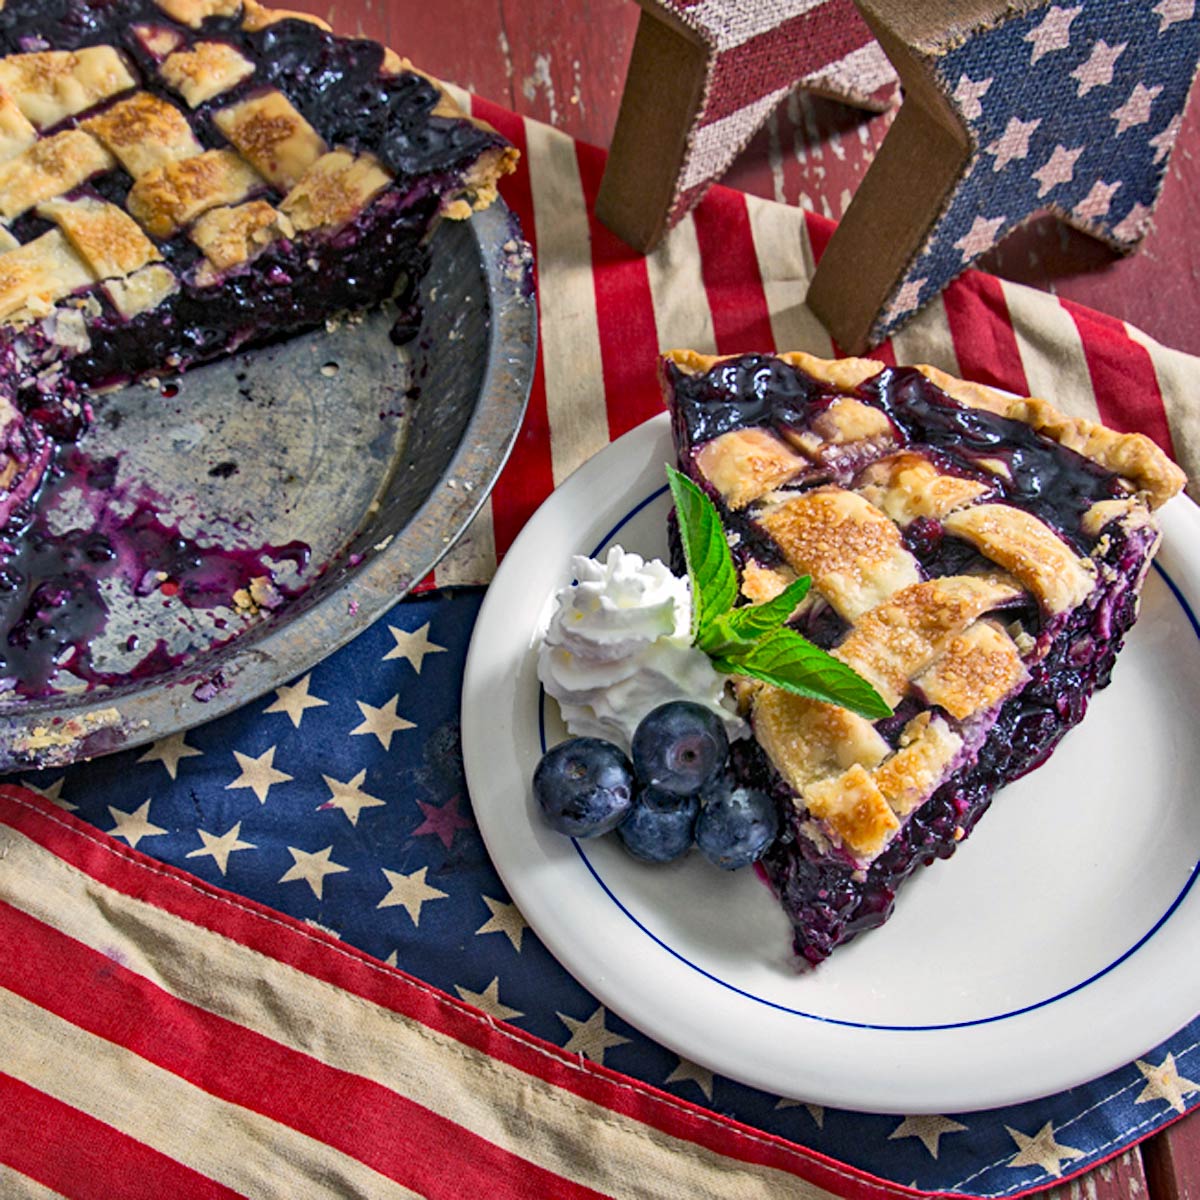 Blueberry pie slice with patriotic-themed table setting.